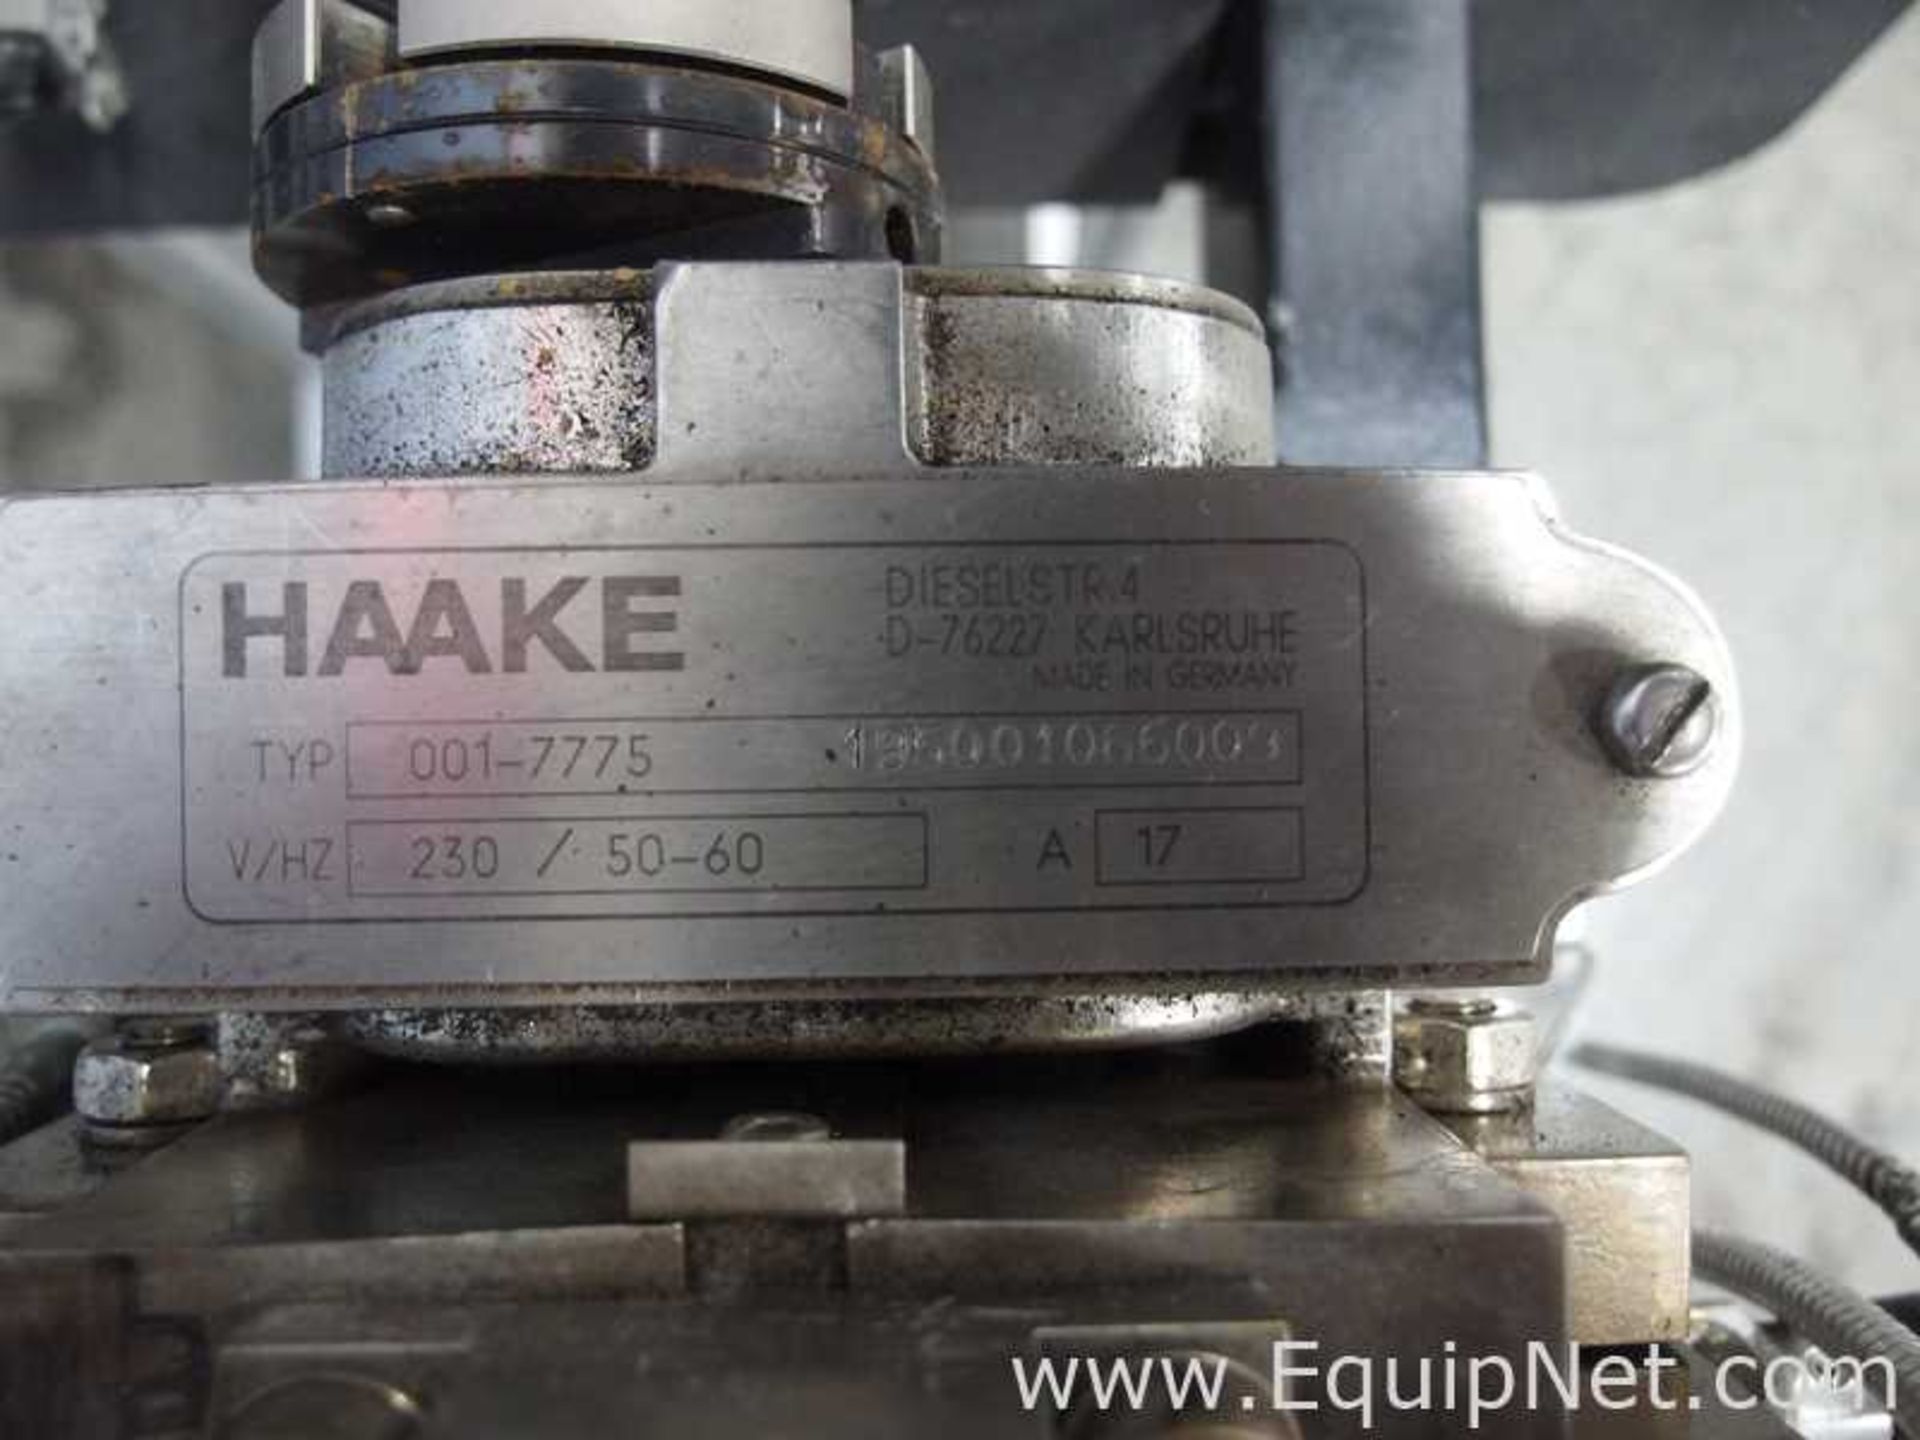 Haake Type 001-9758/194015677002 Lab System With Rheomix 600 Mixer - Image 17 of 18